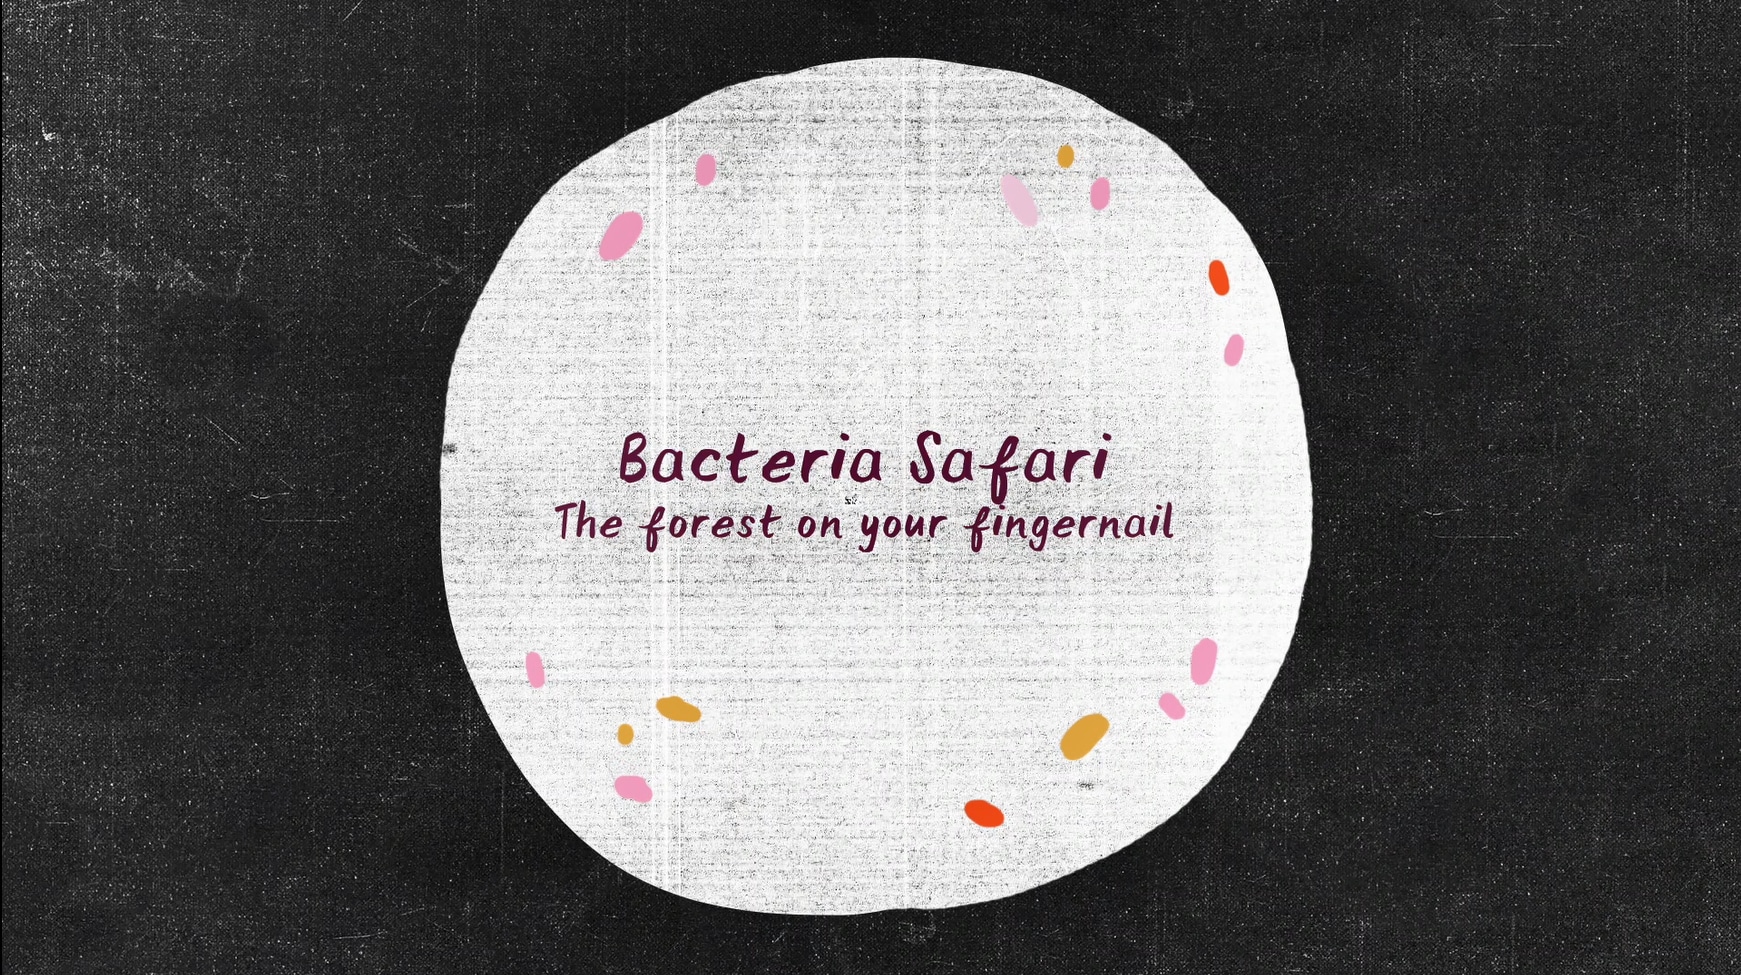 reads bacterial safari - the forest on your fingernail